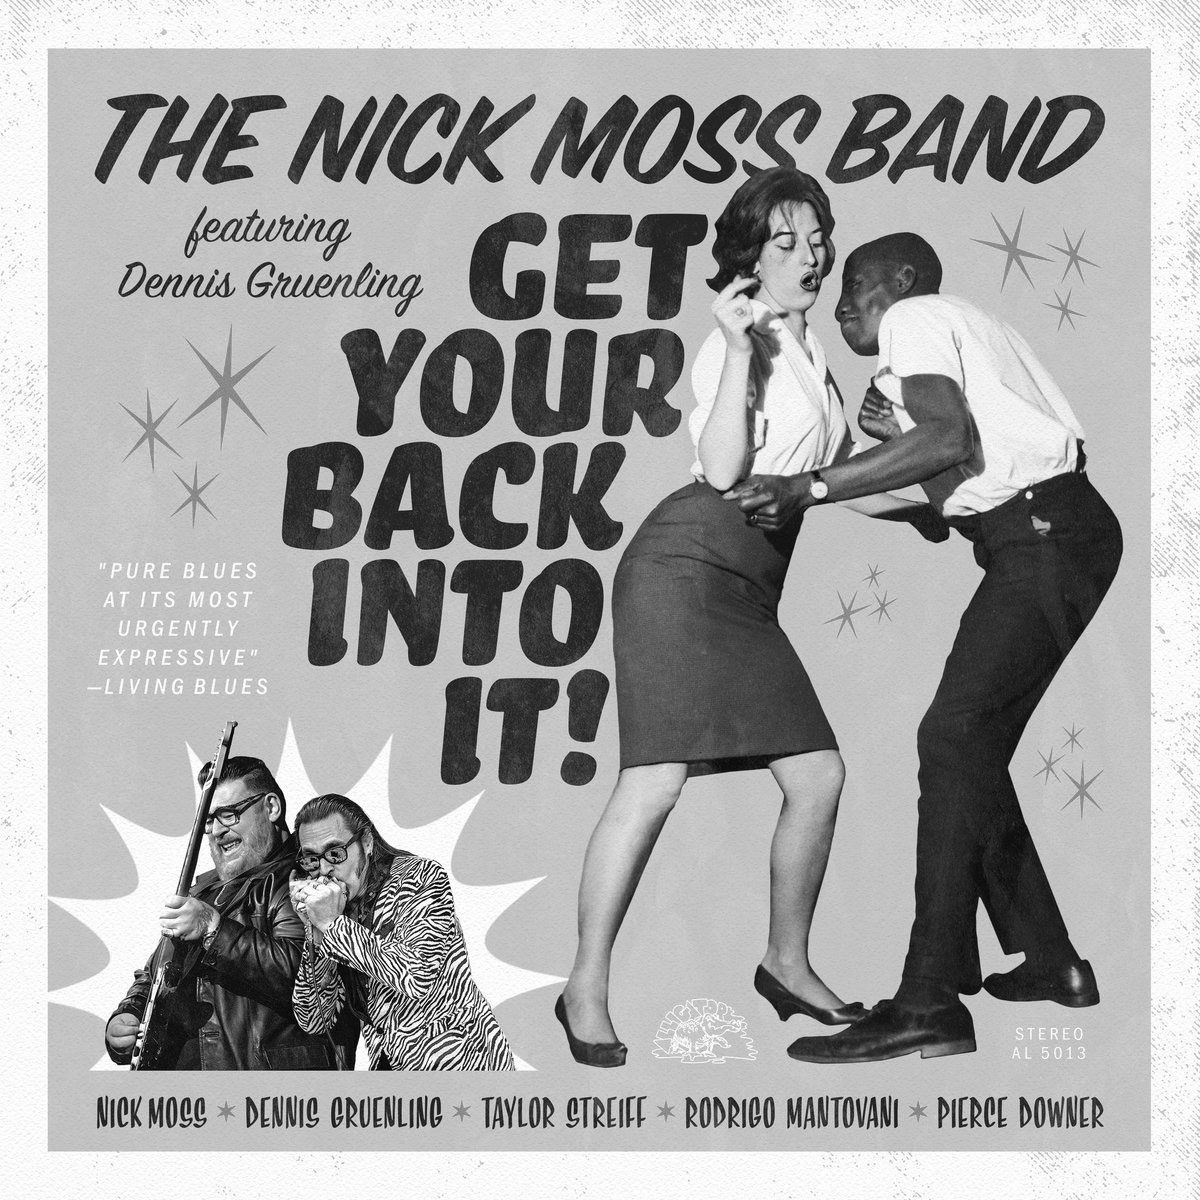 NICK MOSS BAND feat. Dennis Gruenling - Get Your Back Into It! cover album